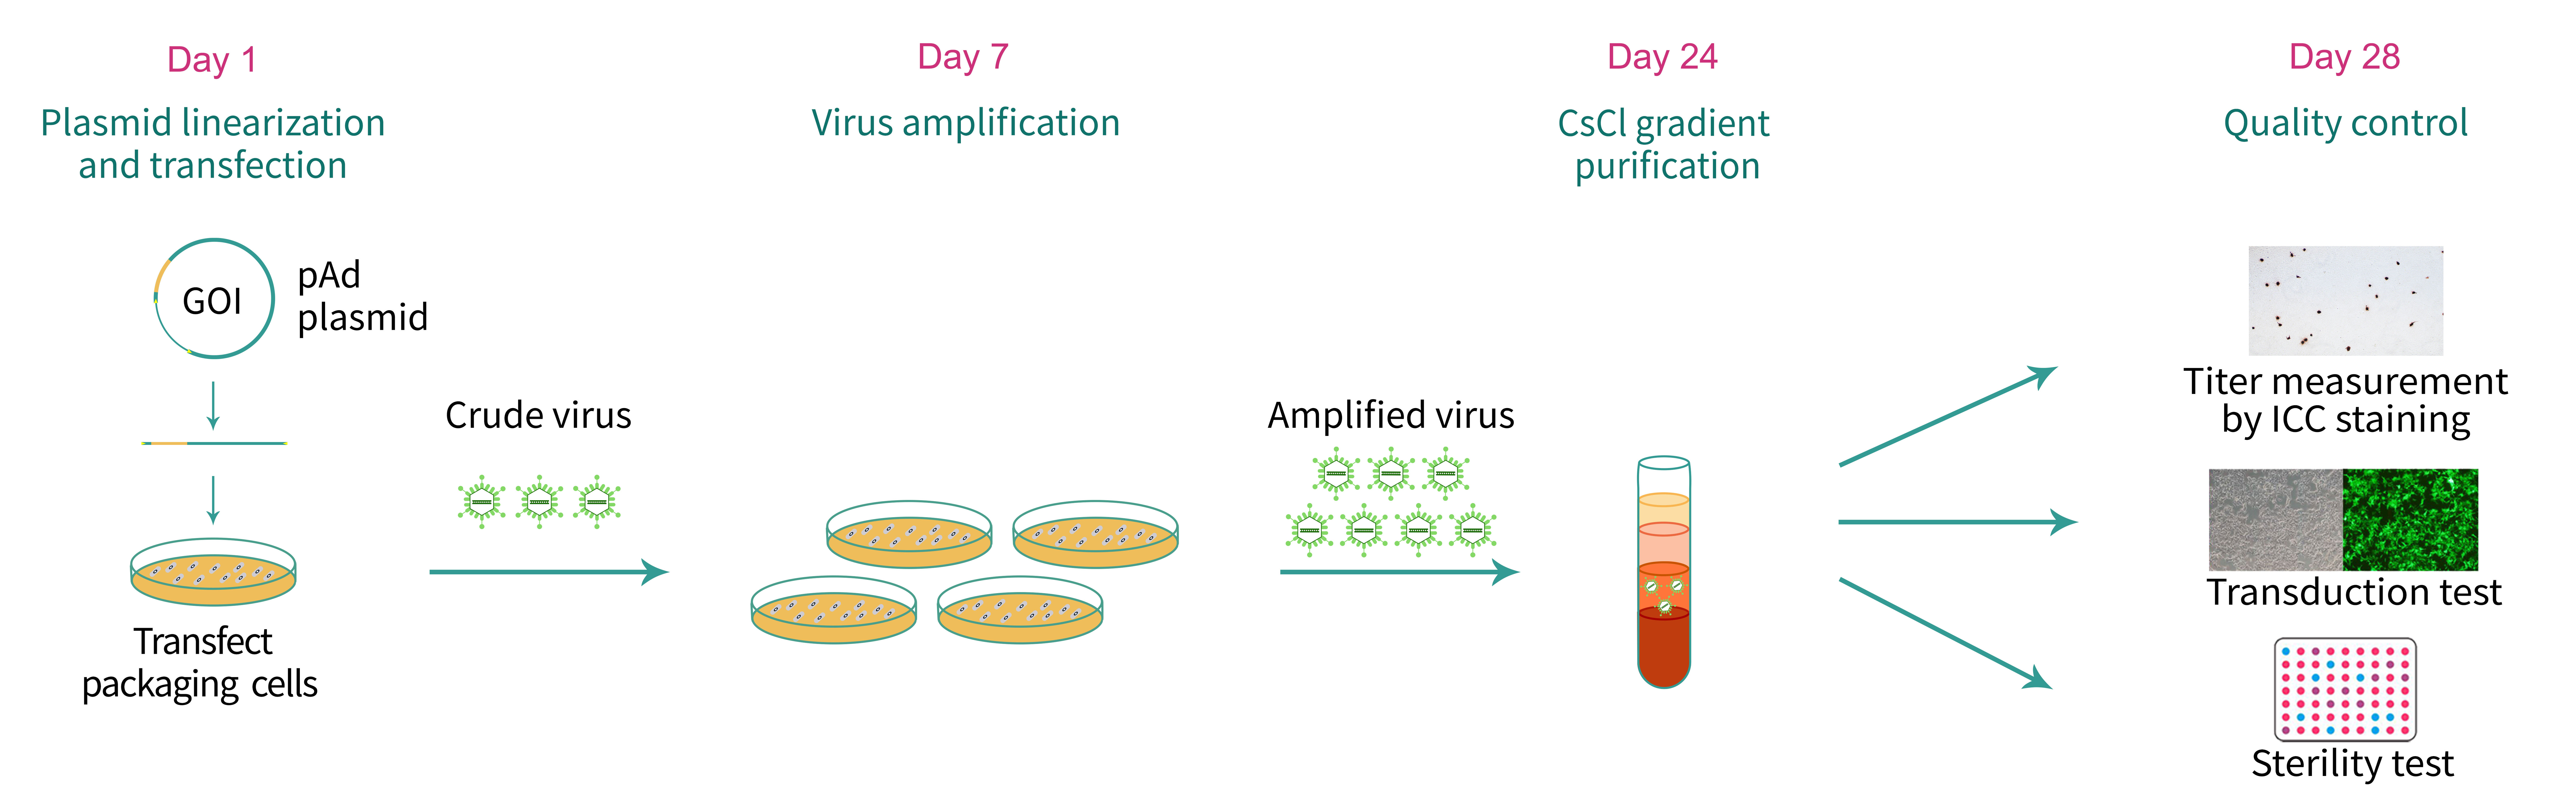 Typical workflow of human Ad5 adenovirus packaging and quality control.